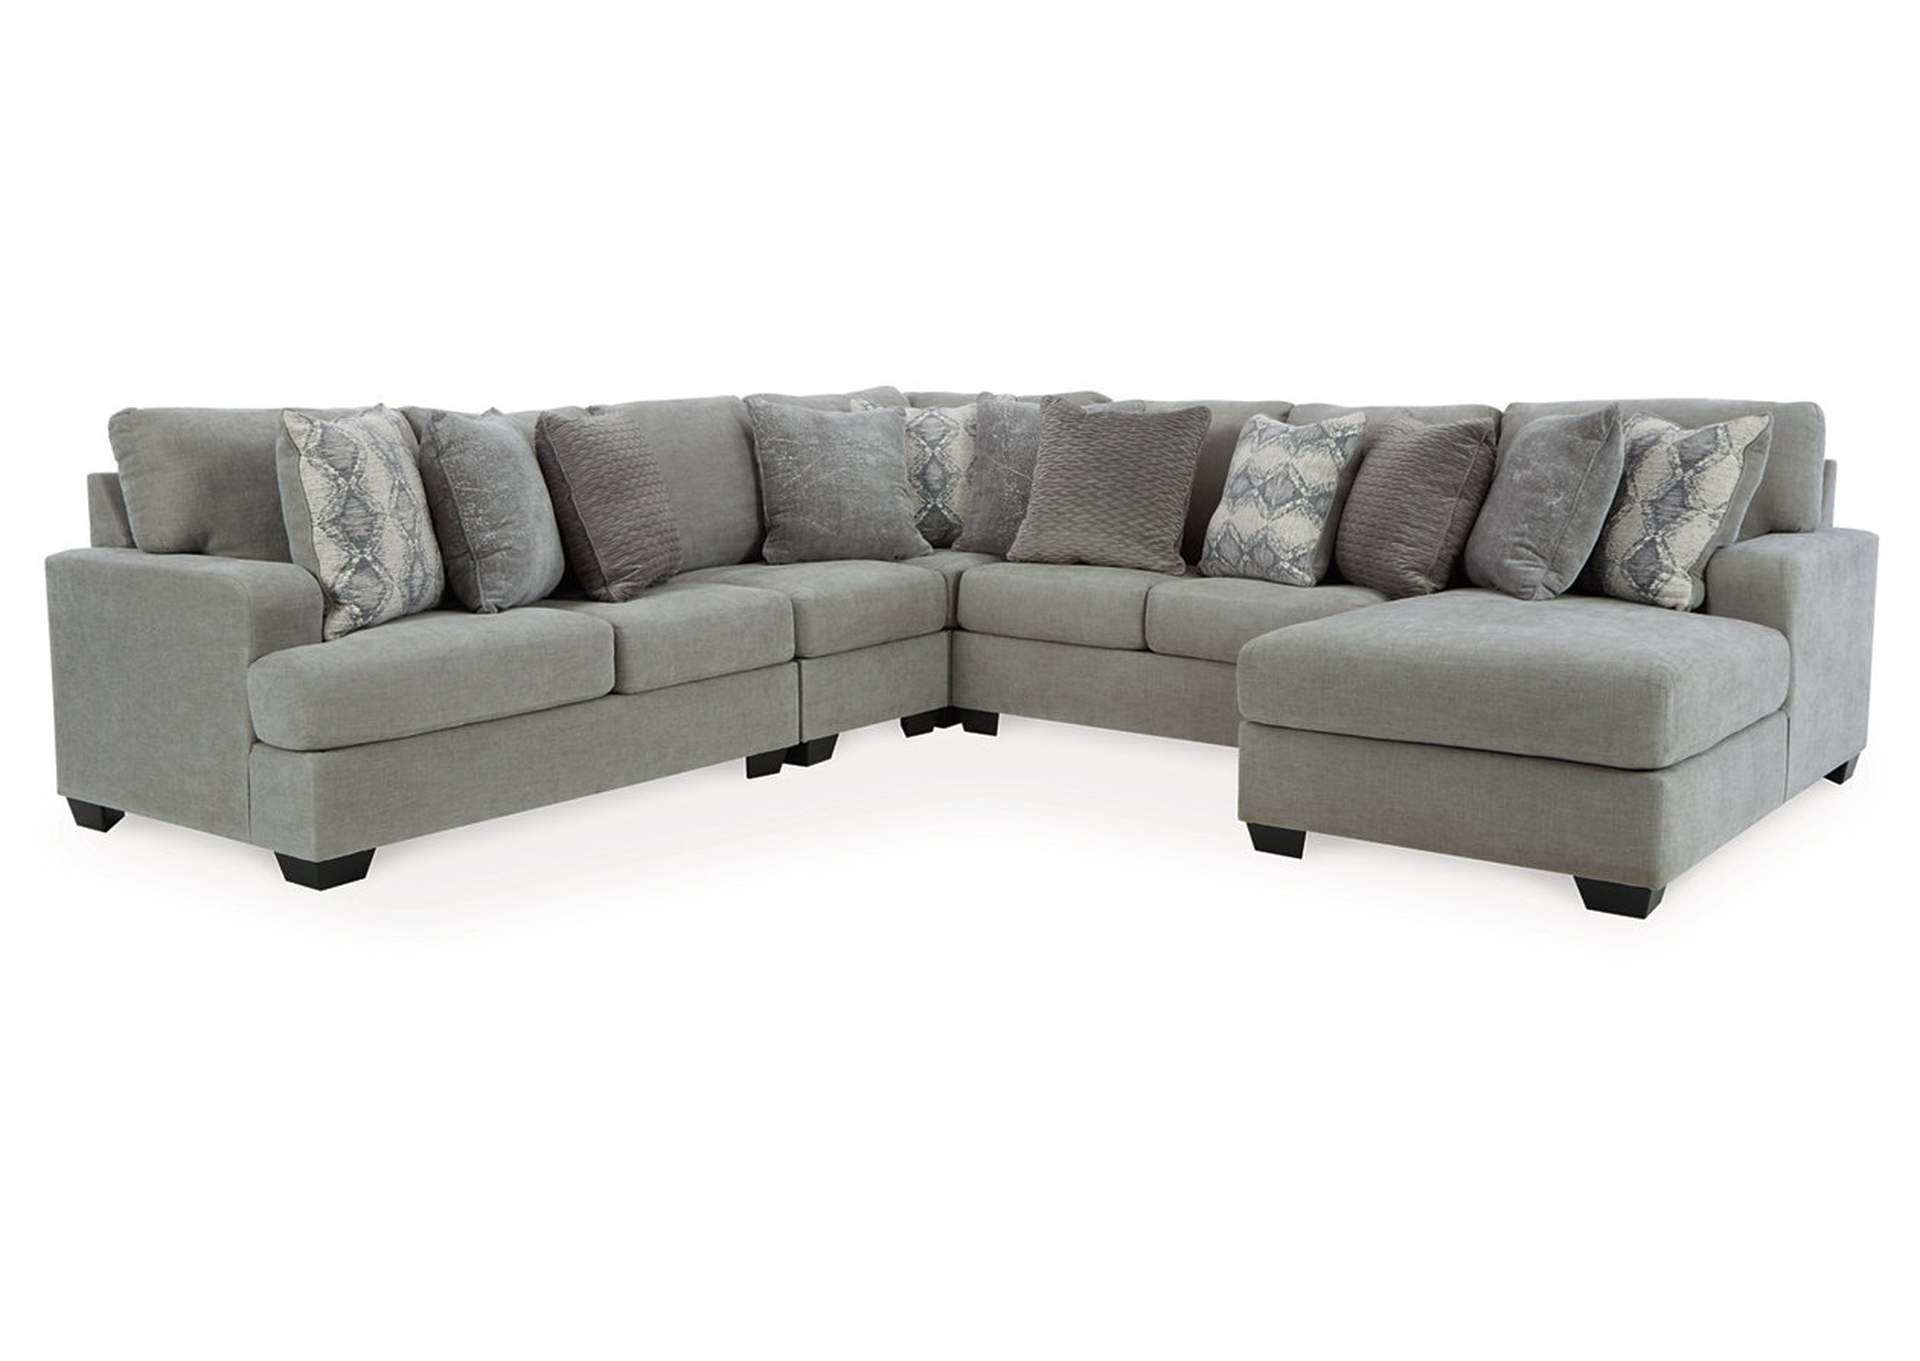 Keener 5-Piece Sectional with Chaise,Ashley